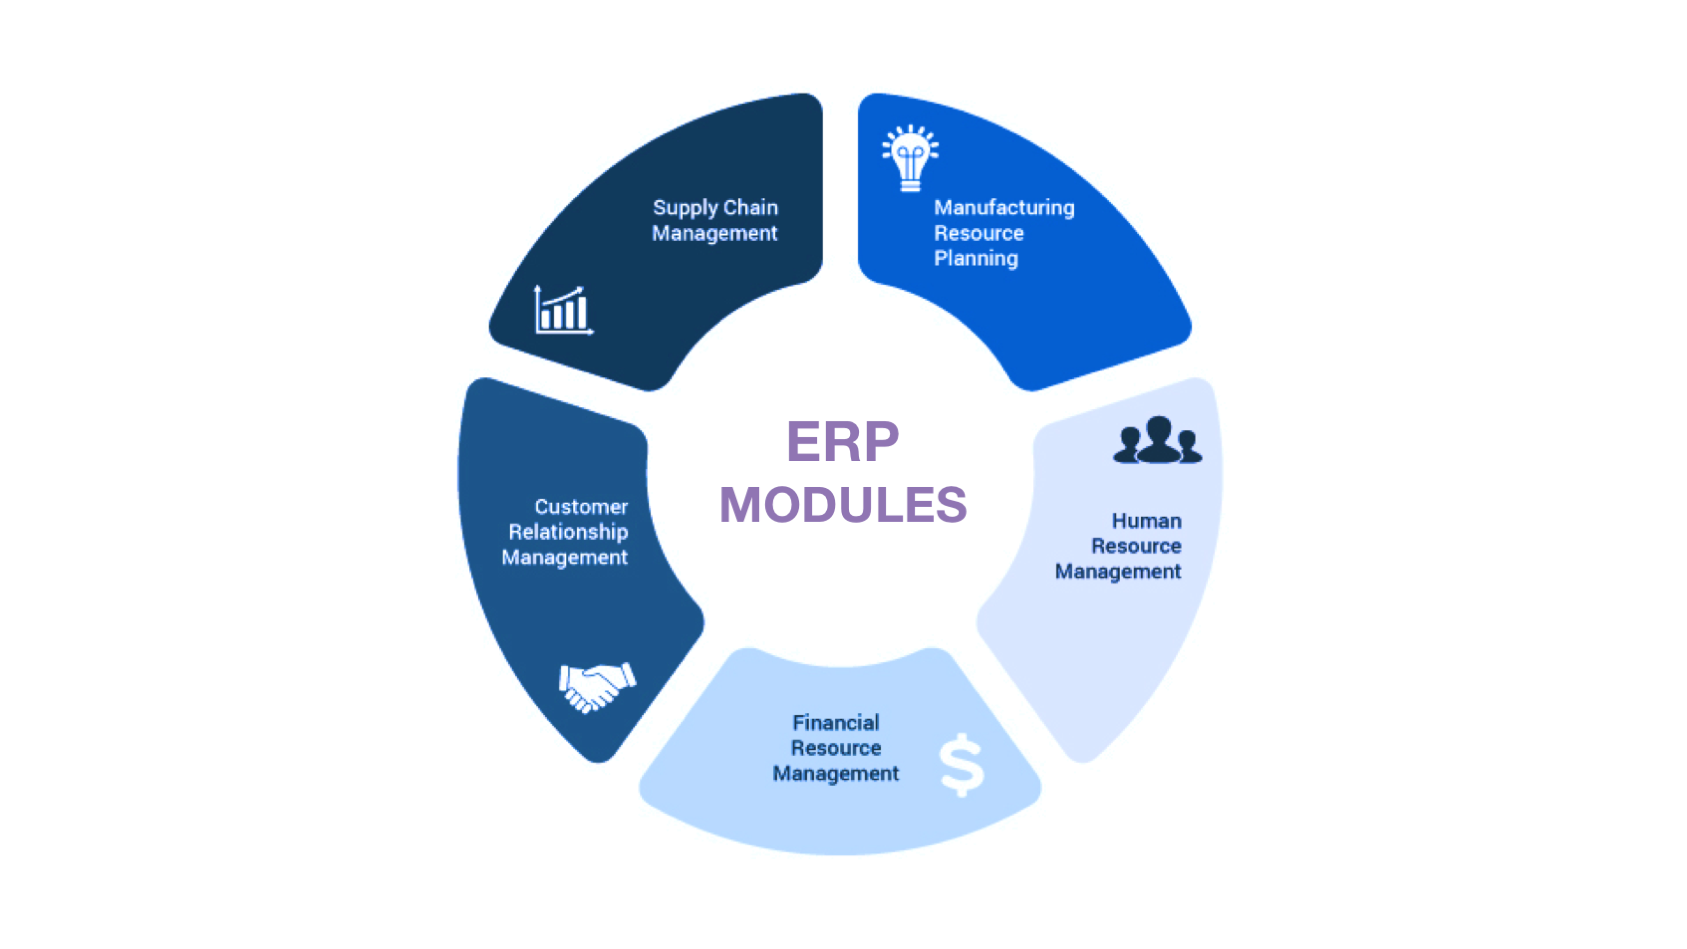 How to build an ERP from scratch - most commonly implemented modules